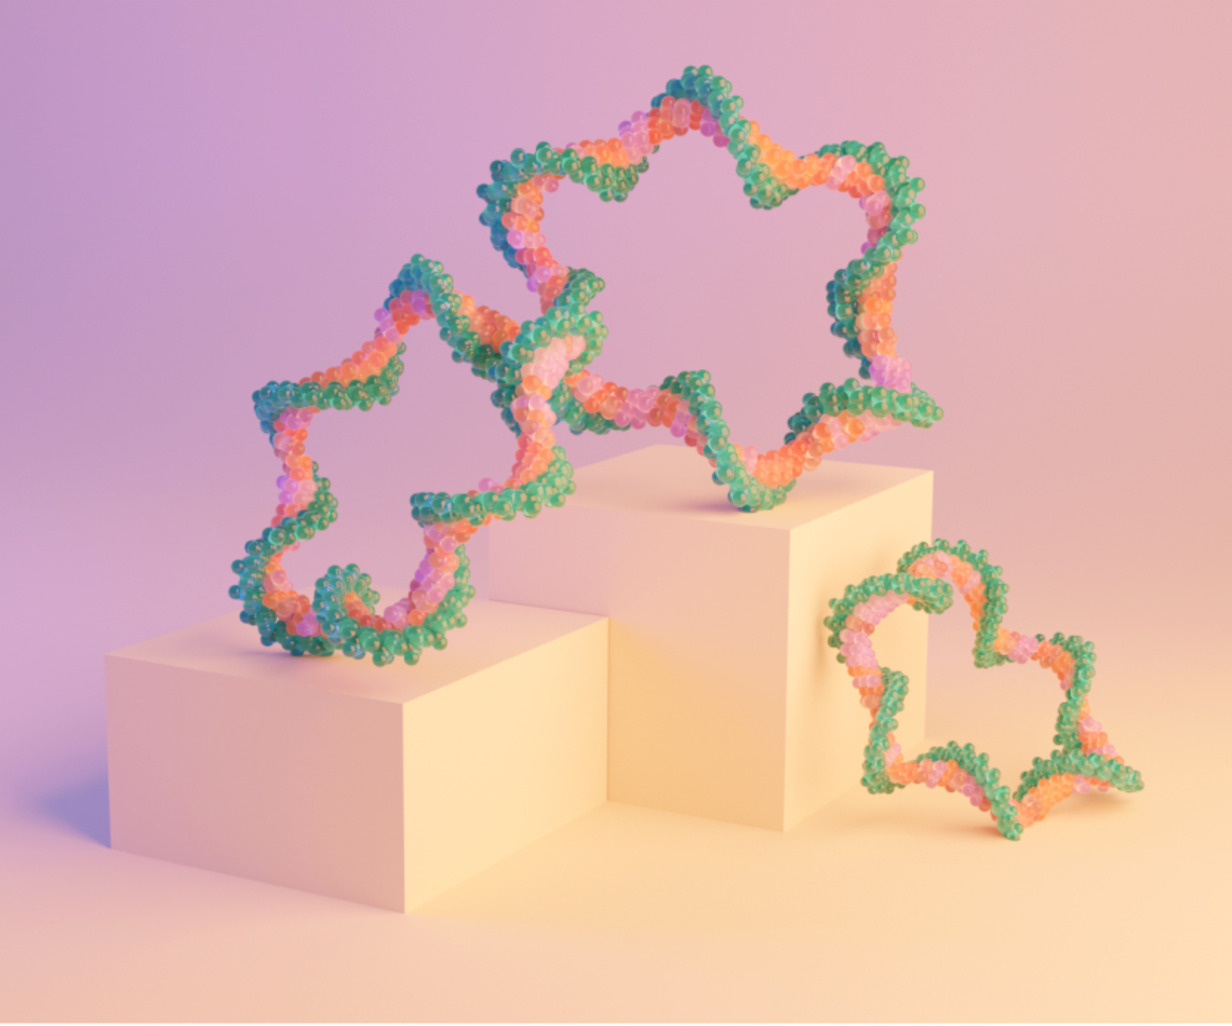 A 3D rendering of circular RNAs, placed on a soft peach and pink backdrop